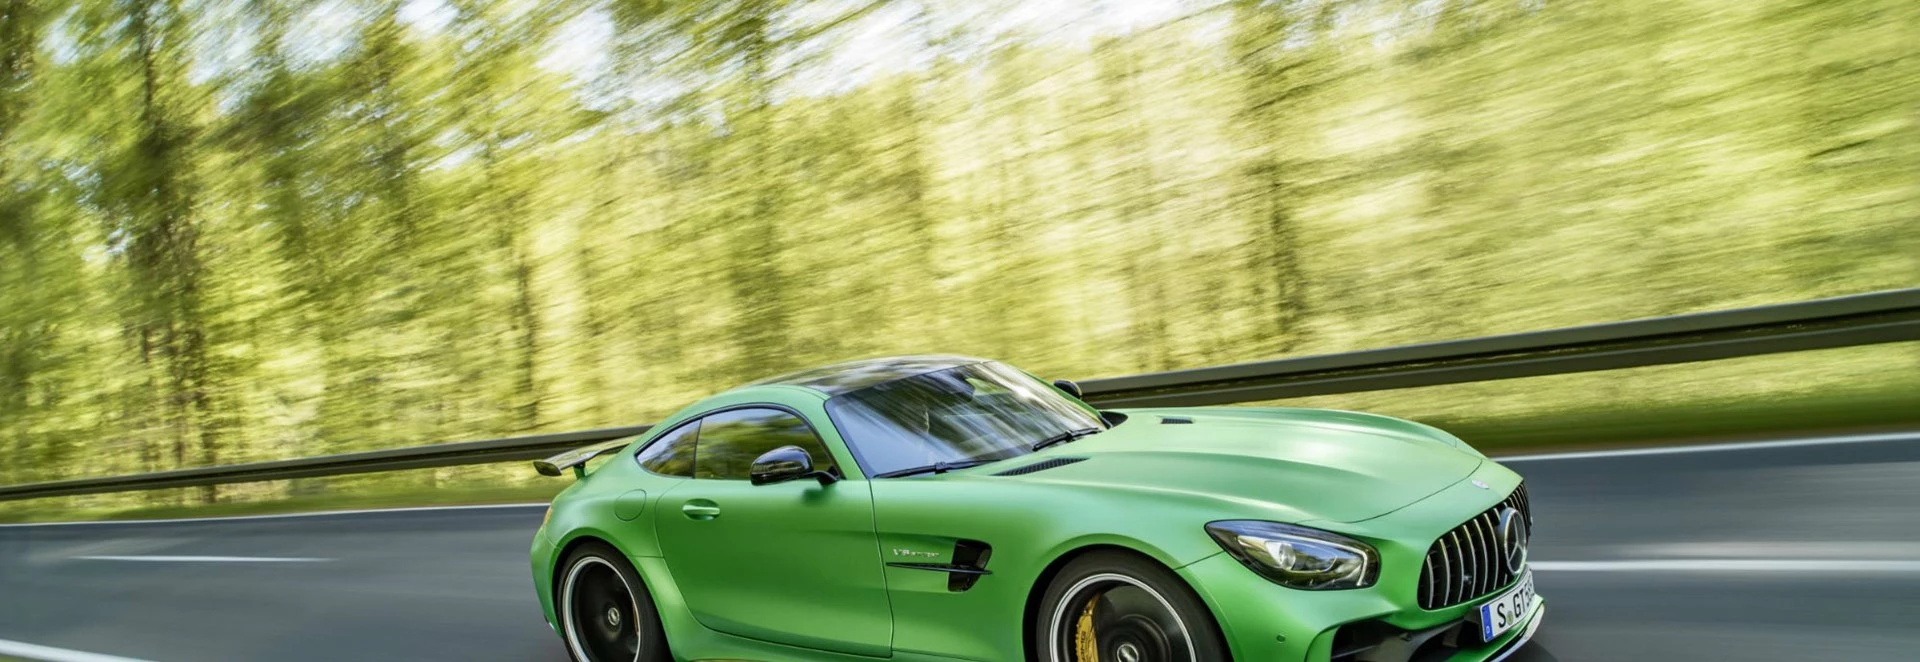 Mercedes’ 577bhp AMG GT R Coupe Pricing Announced 